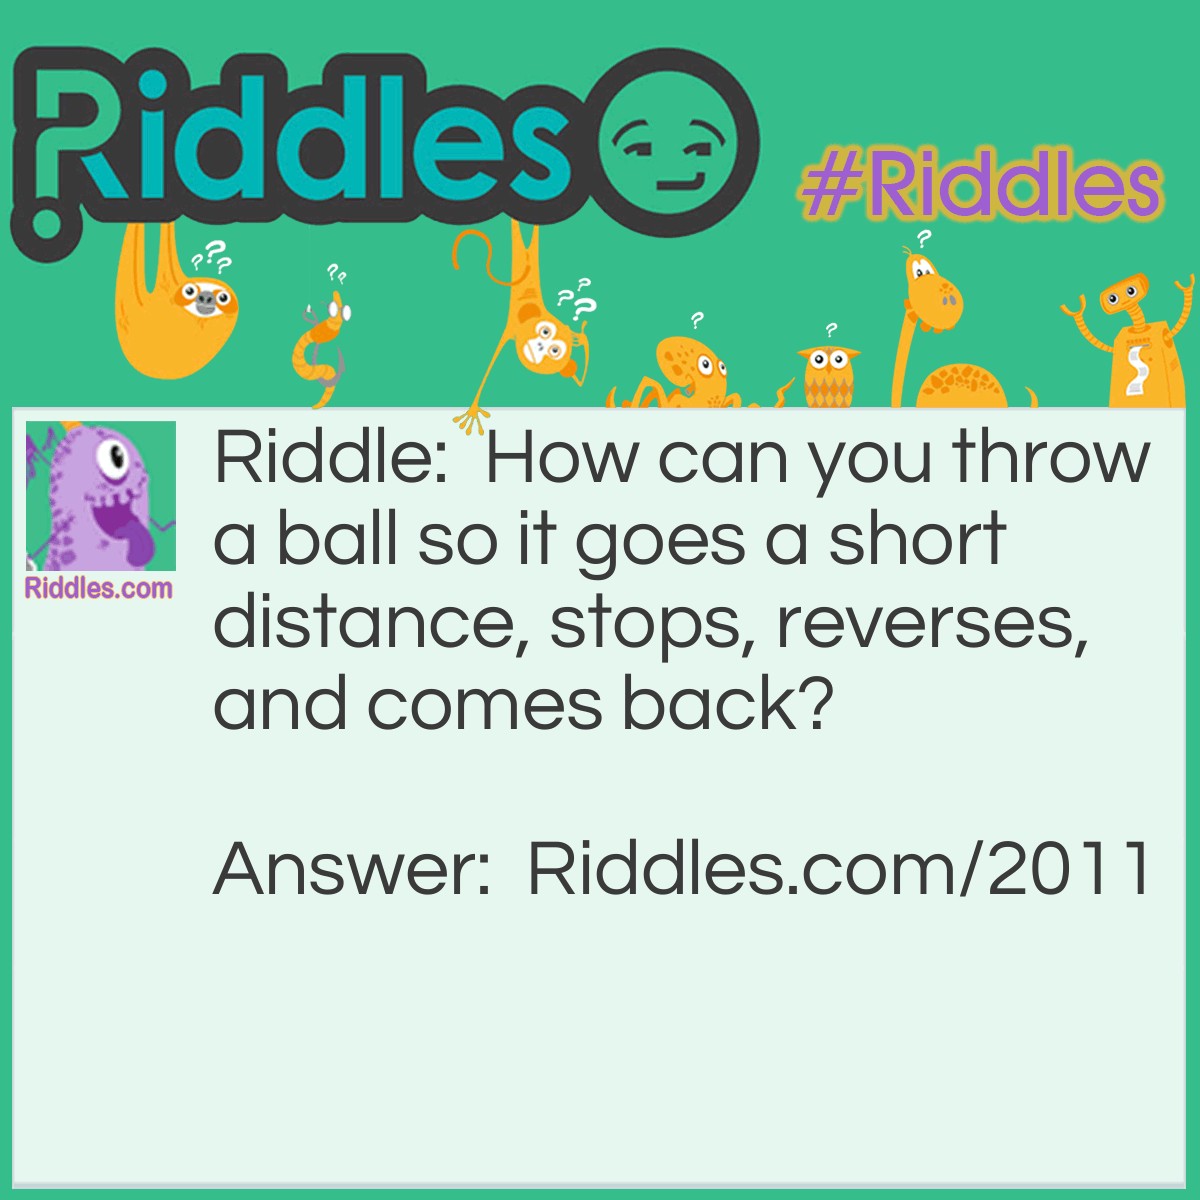 Riddle: How can you throw a ball so it goes a short distance, stops, reverses, and comes back? Answer: Throw it upward.